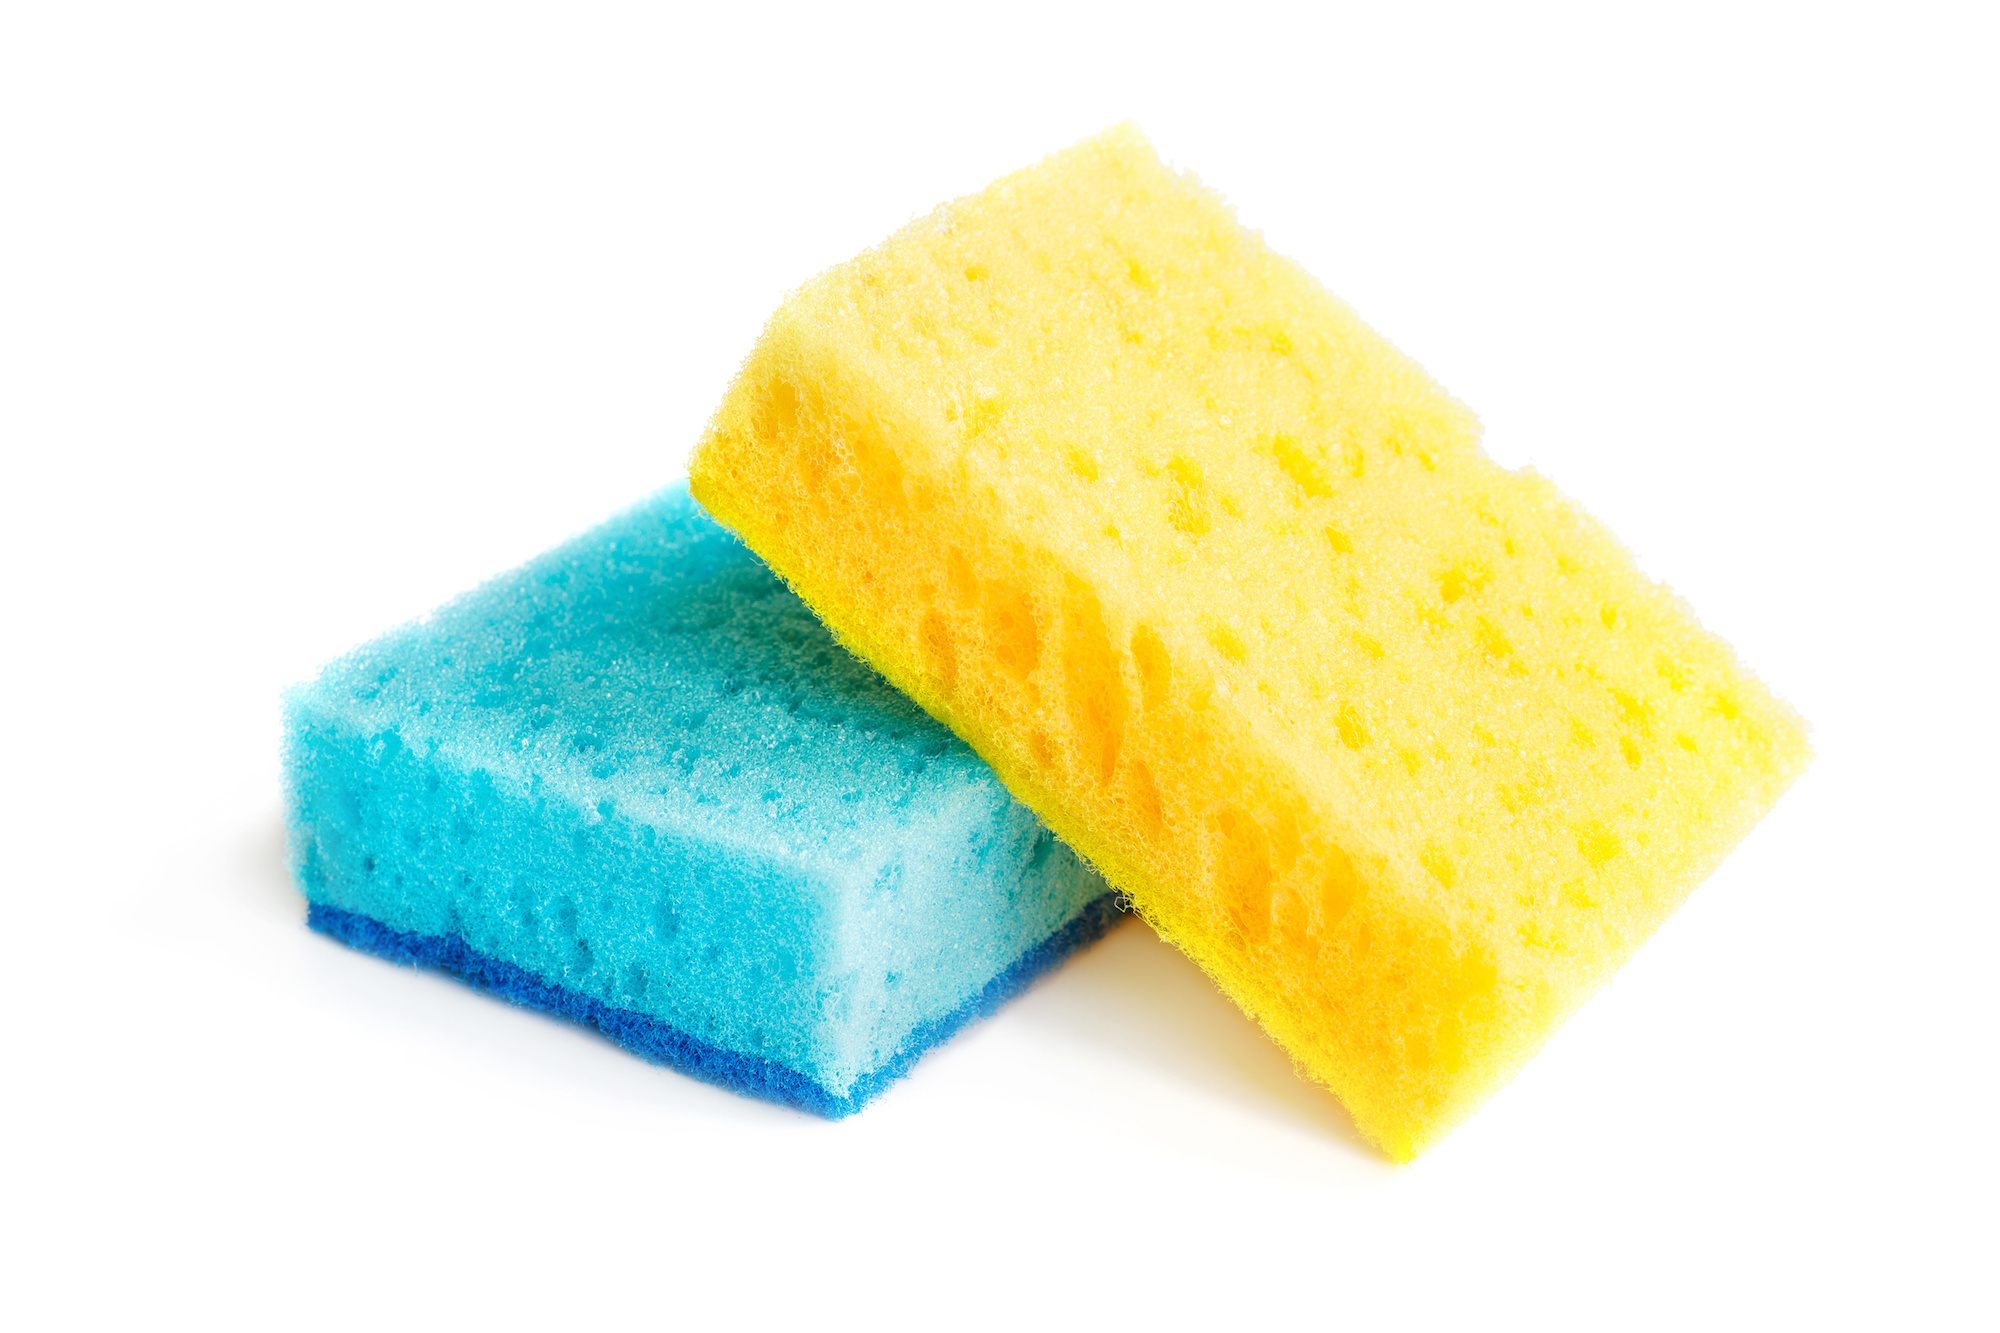 Image of two sponges, one with a scrub side and one without.